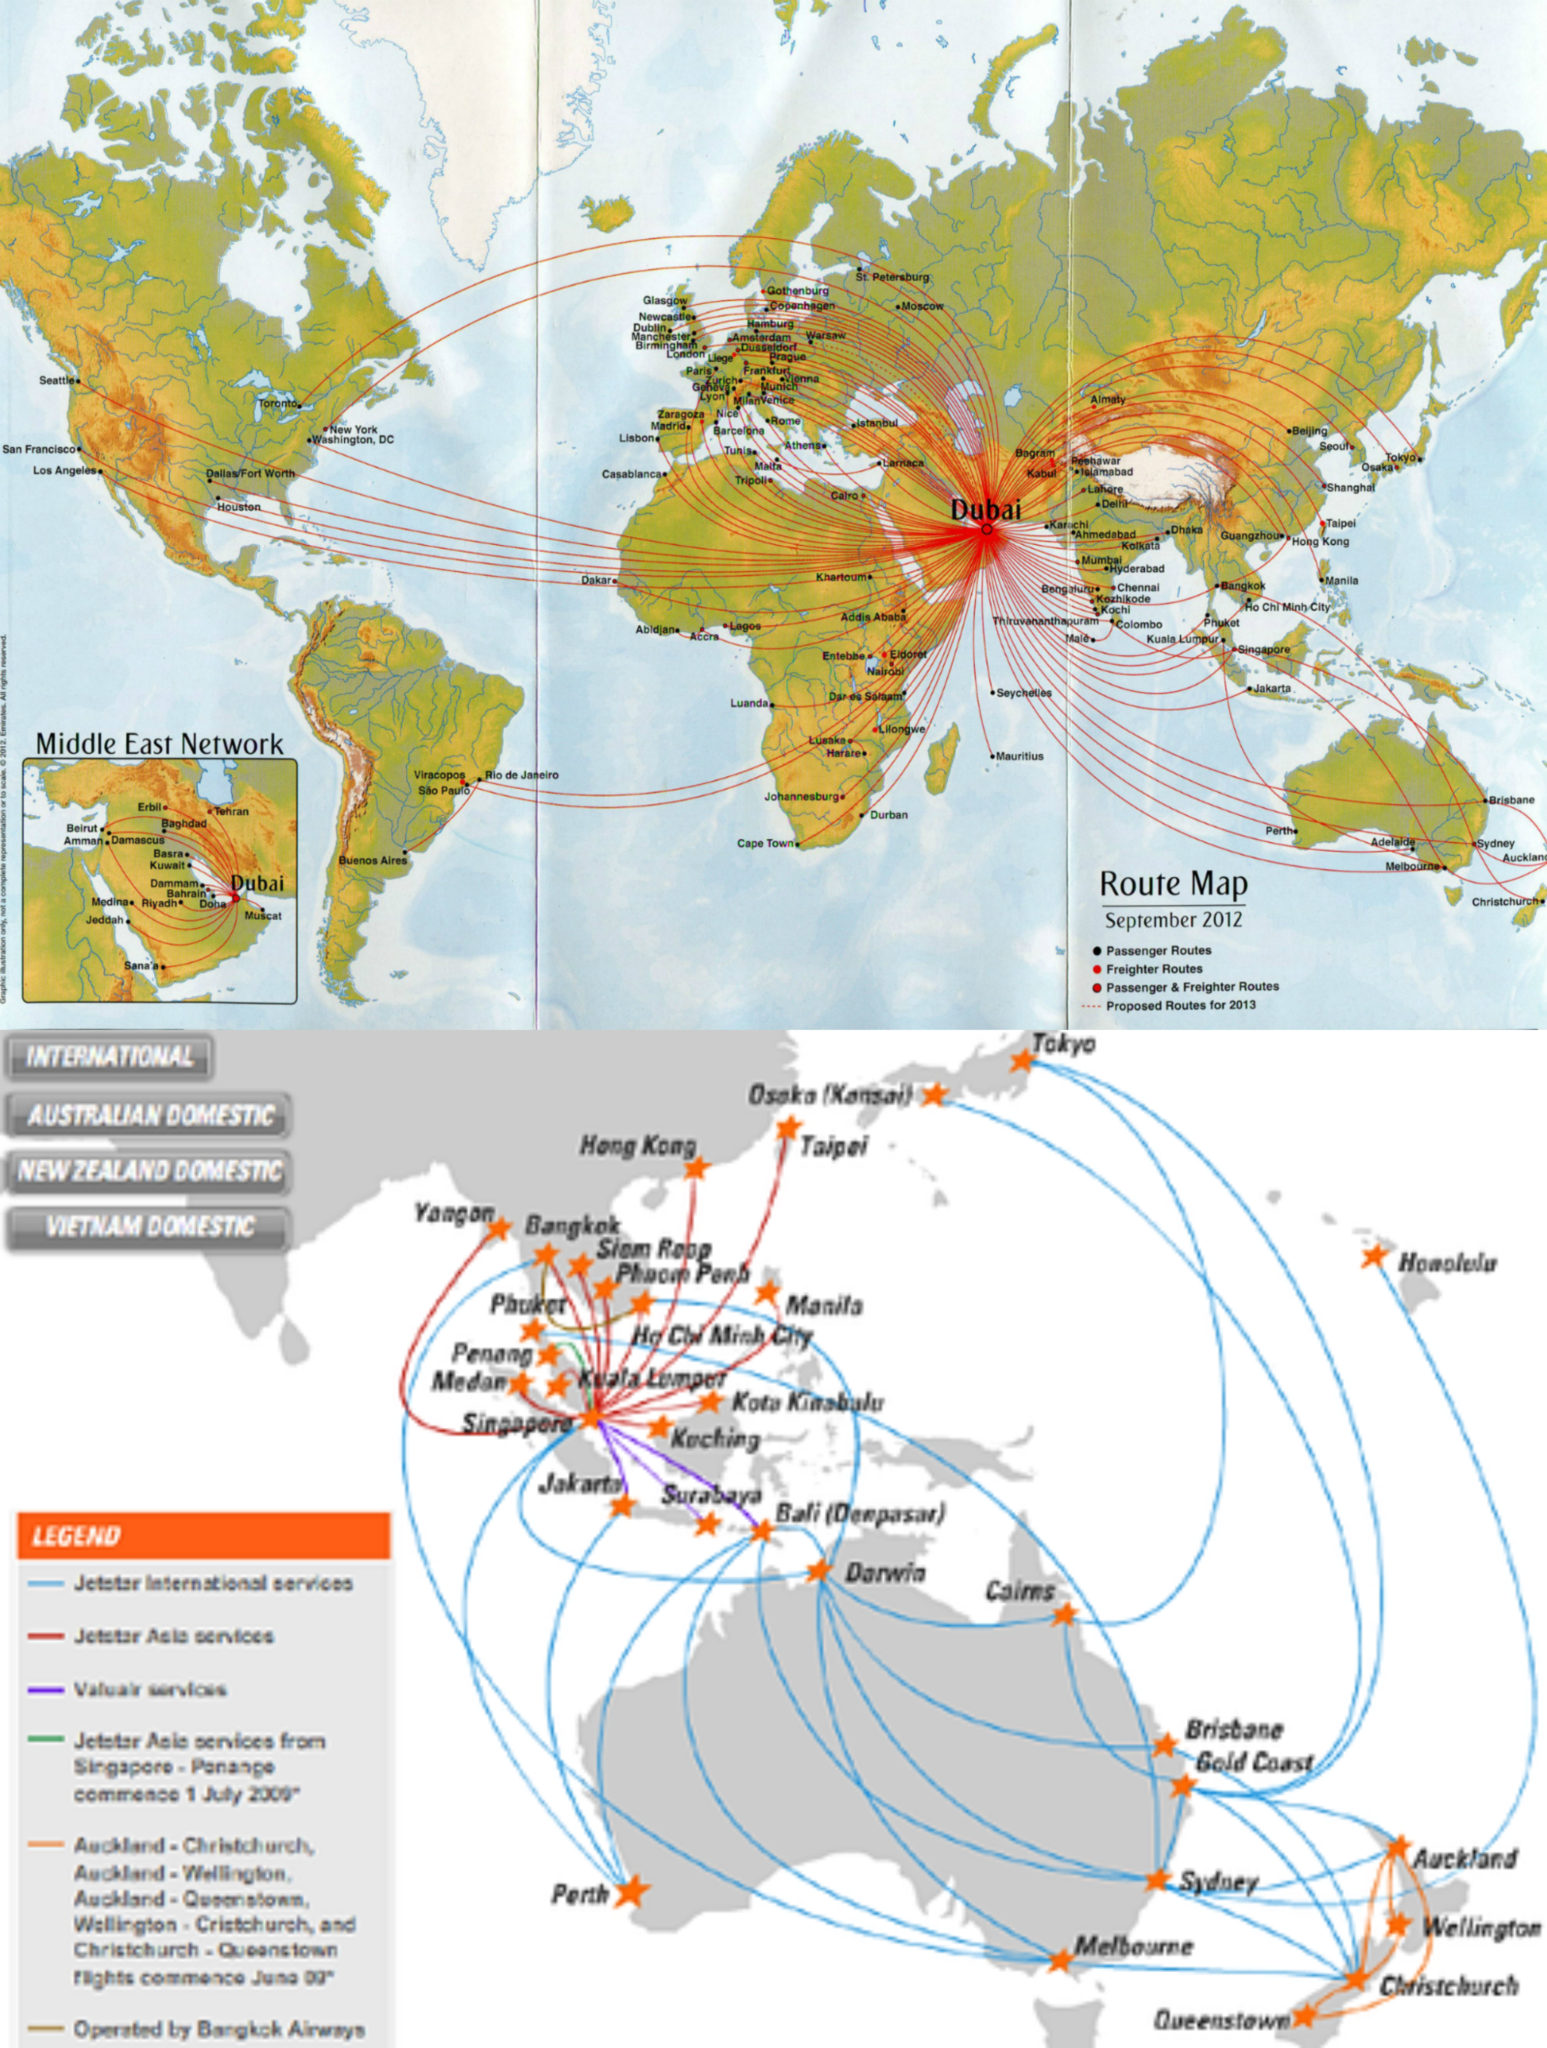 Emirates' 'hub-and-spoke' route map feeds all passengers through Dubai, whereas Jetstar's 'point-to-point' route map offers direct flights from several origins. (Images: Airways News and Centre for Aviation)